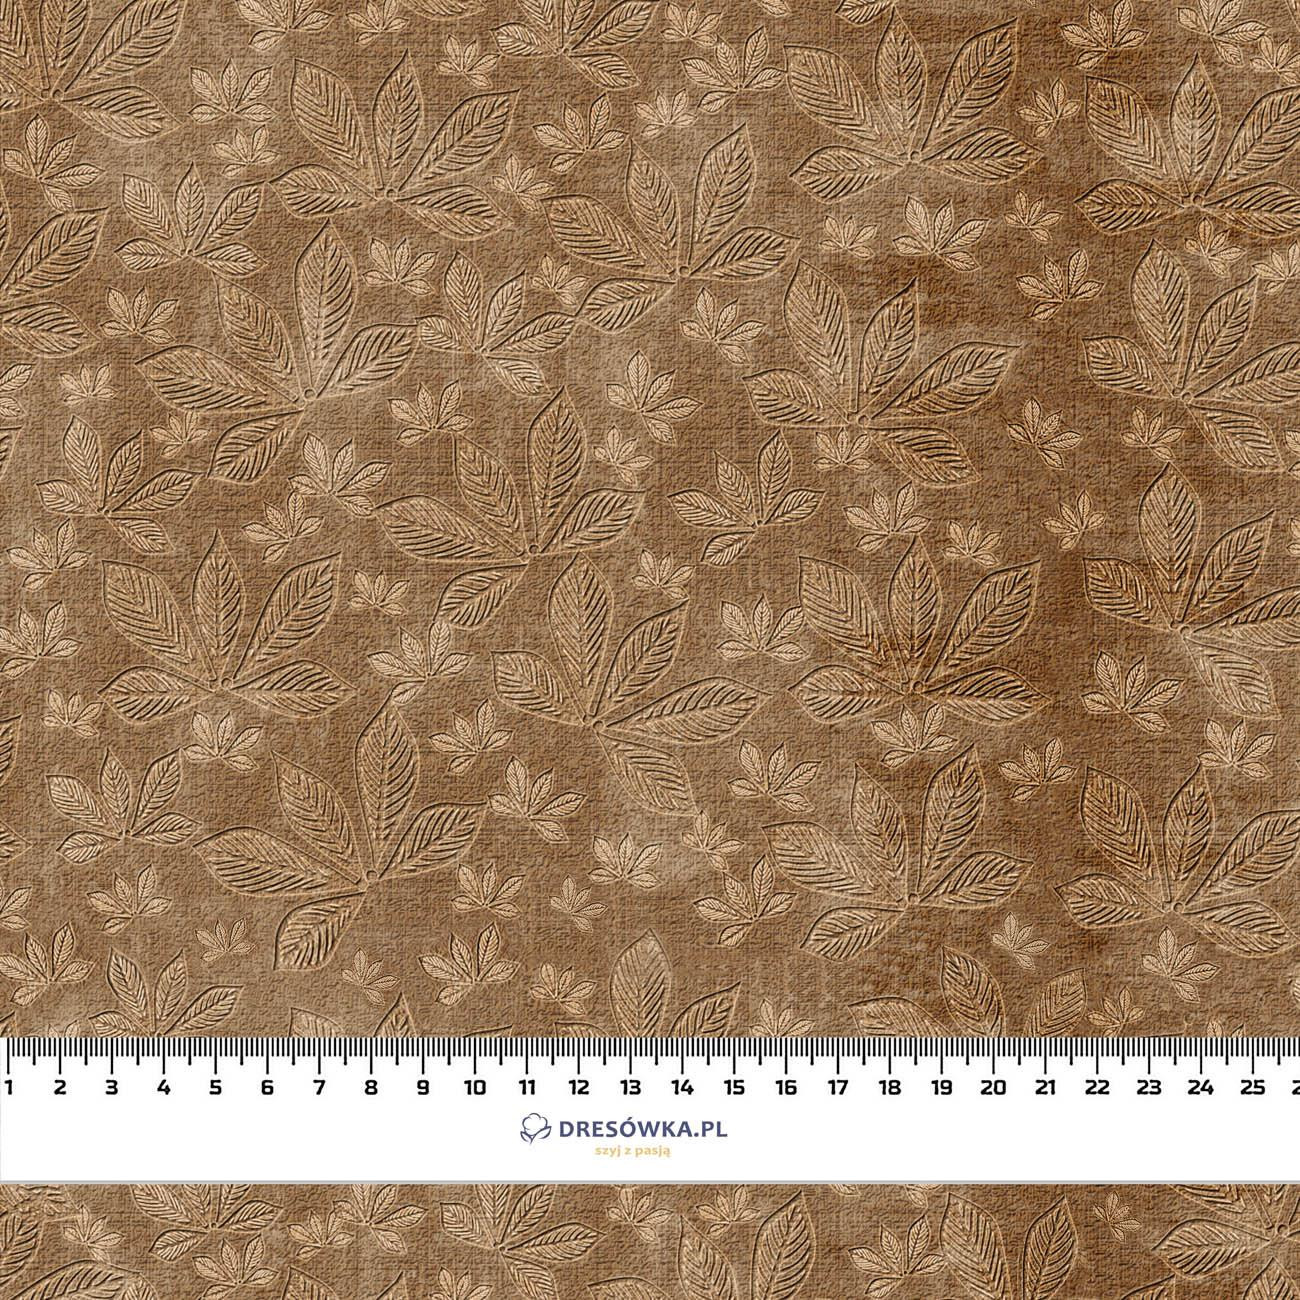 CHESTNUT LEAVES Ms.2 / brown (AUTUMN COLORS) - Cotton woven fabric